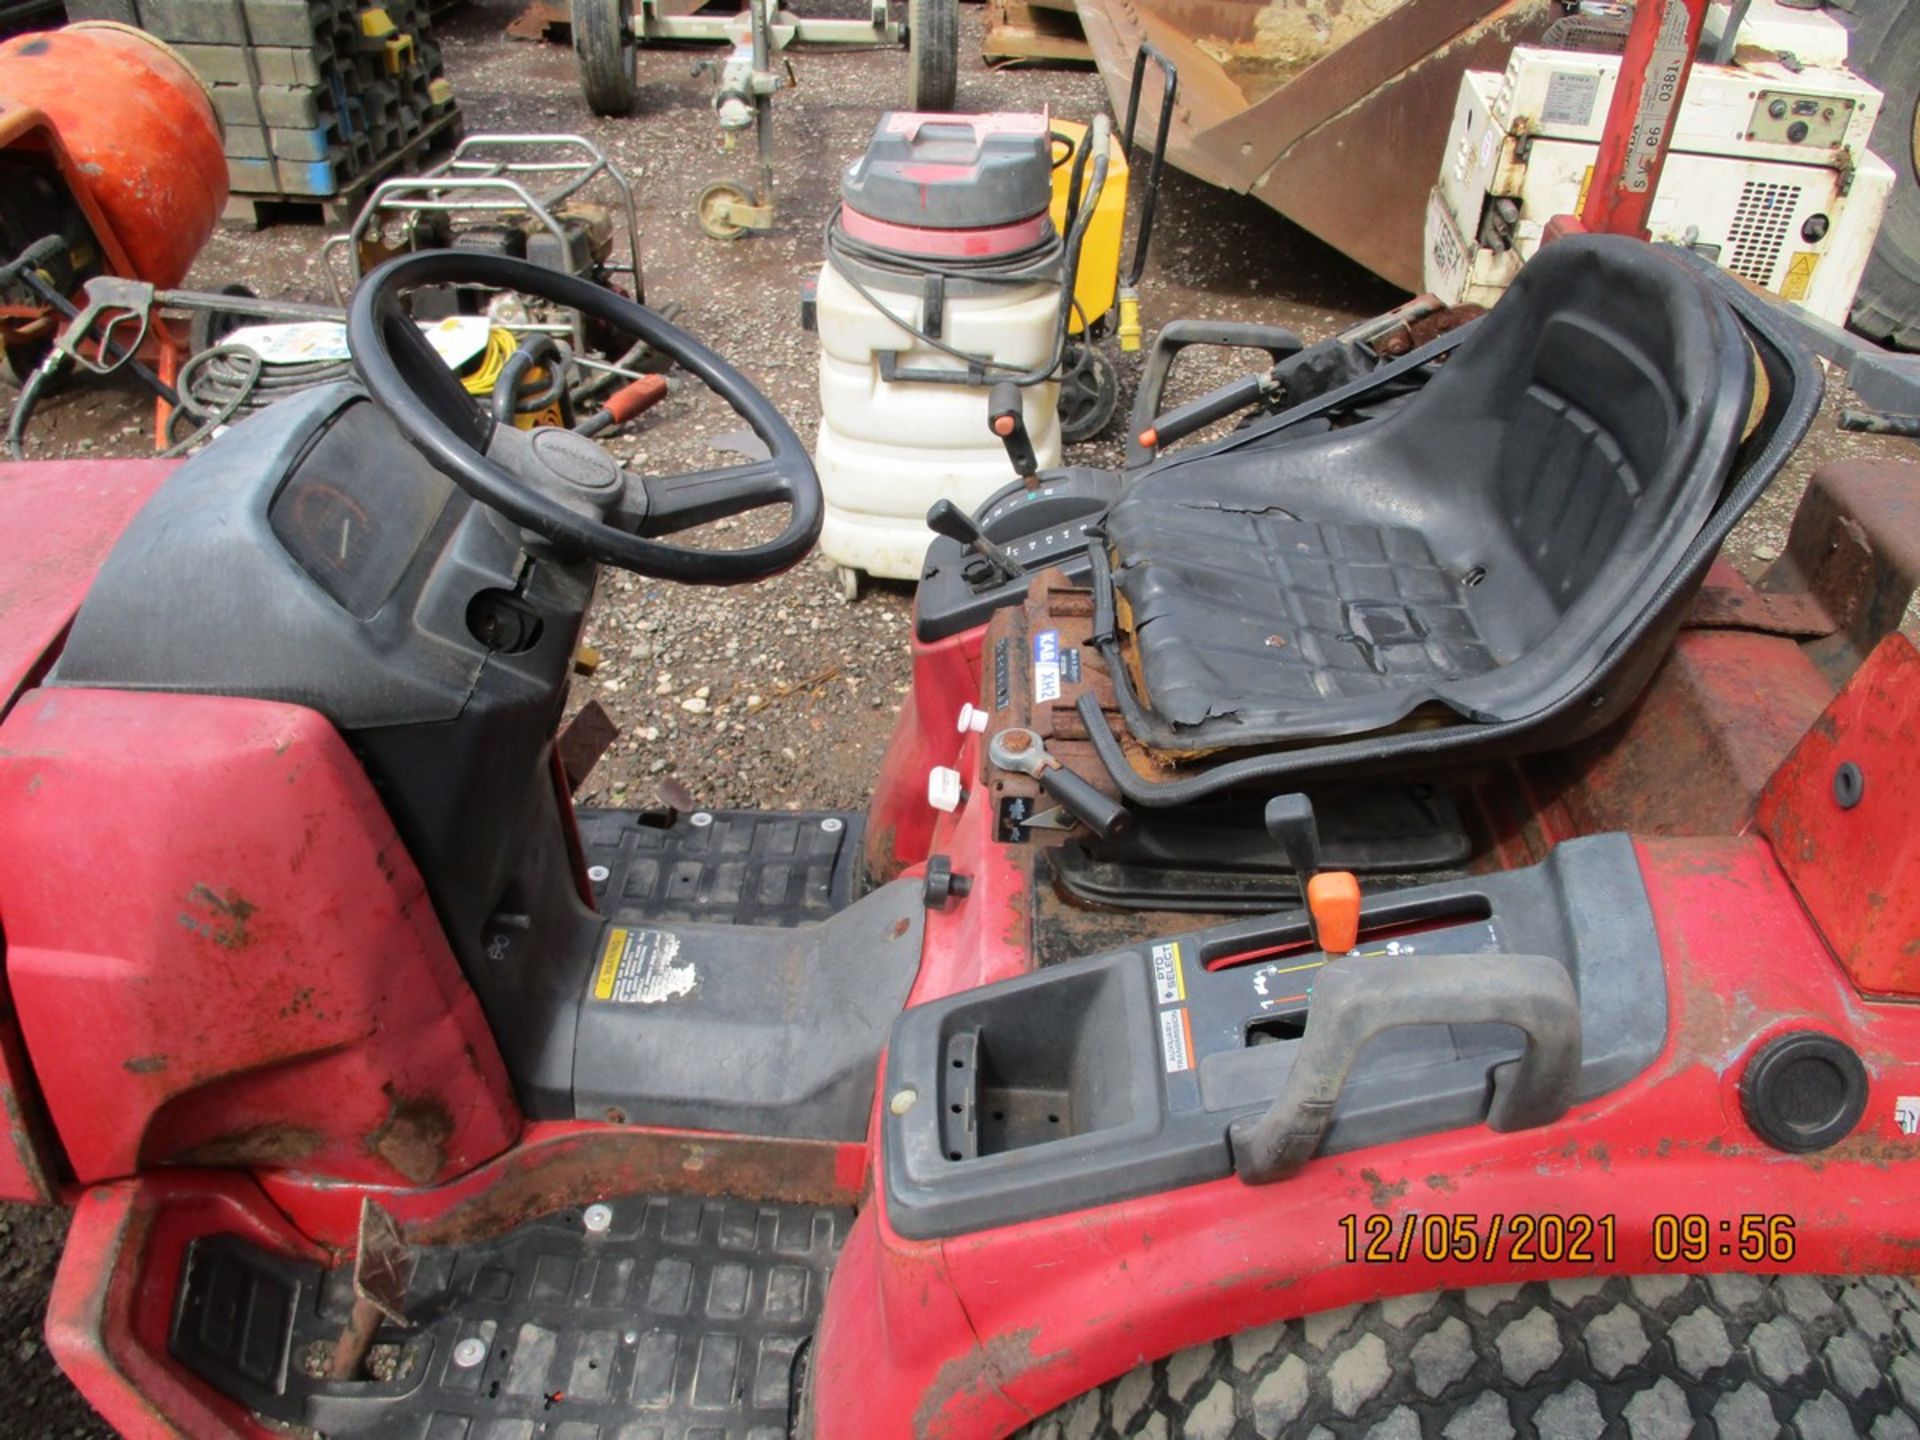 HONDA 6522 COMPACT TRACTOR 2942 HRS - Image 4 of 5